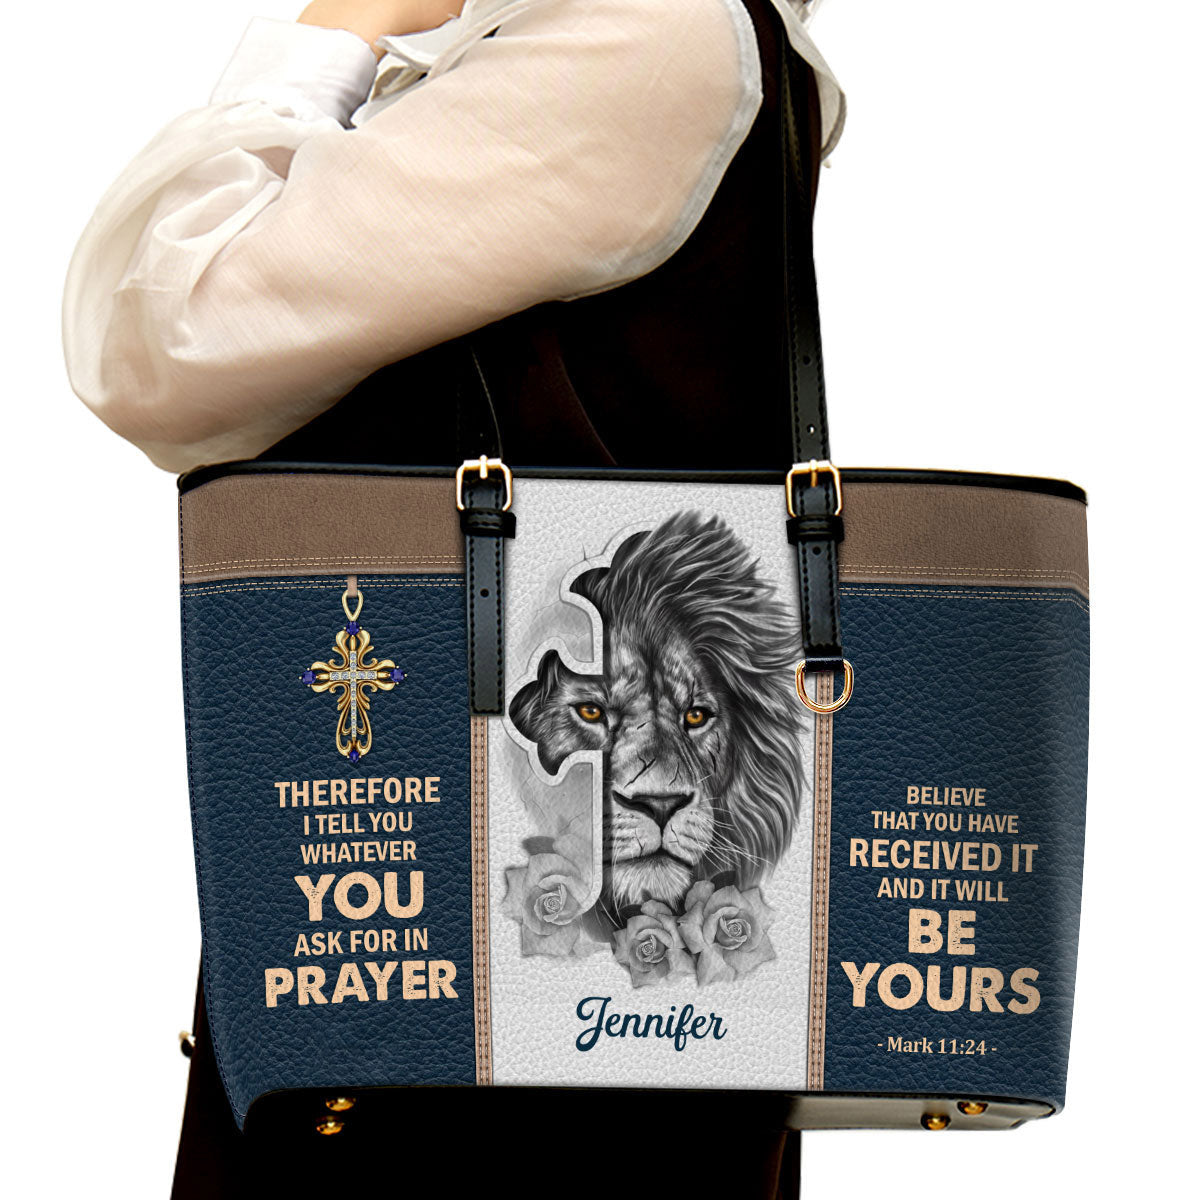 Believe That You Have Received It Personalized Large Leather Tote Bag - Christian Gifts For Women